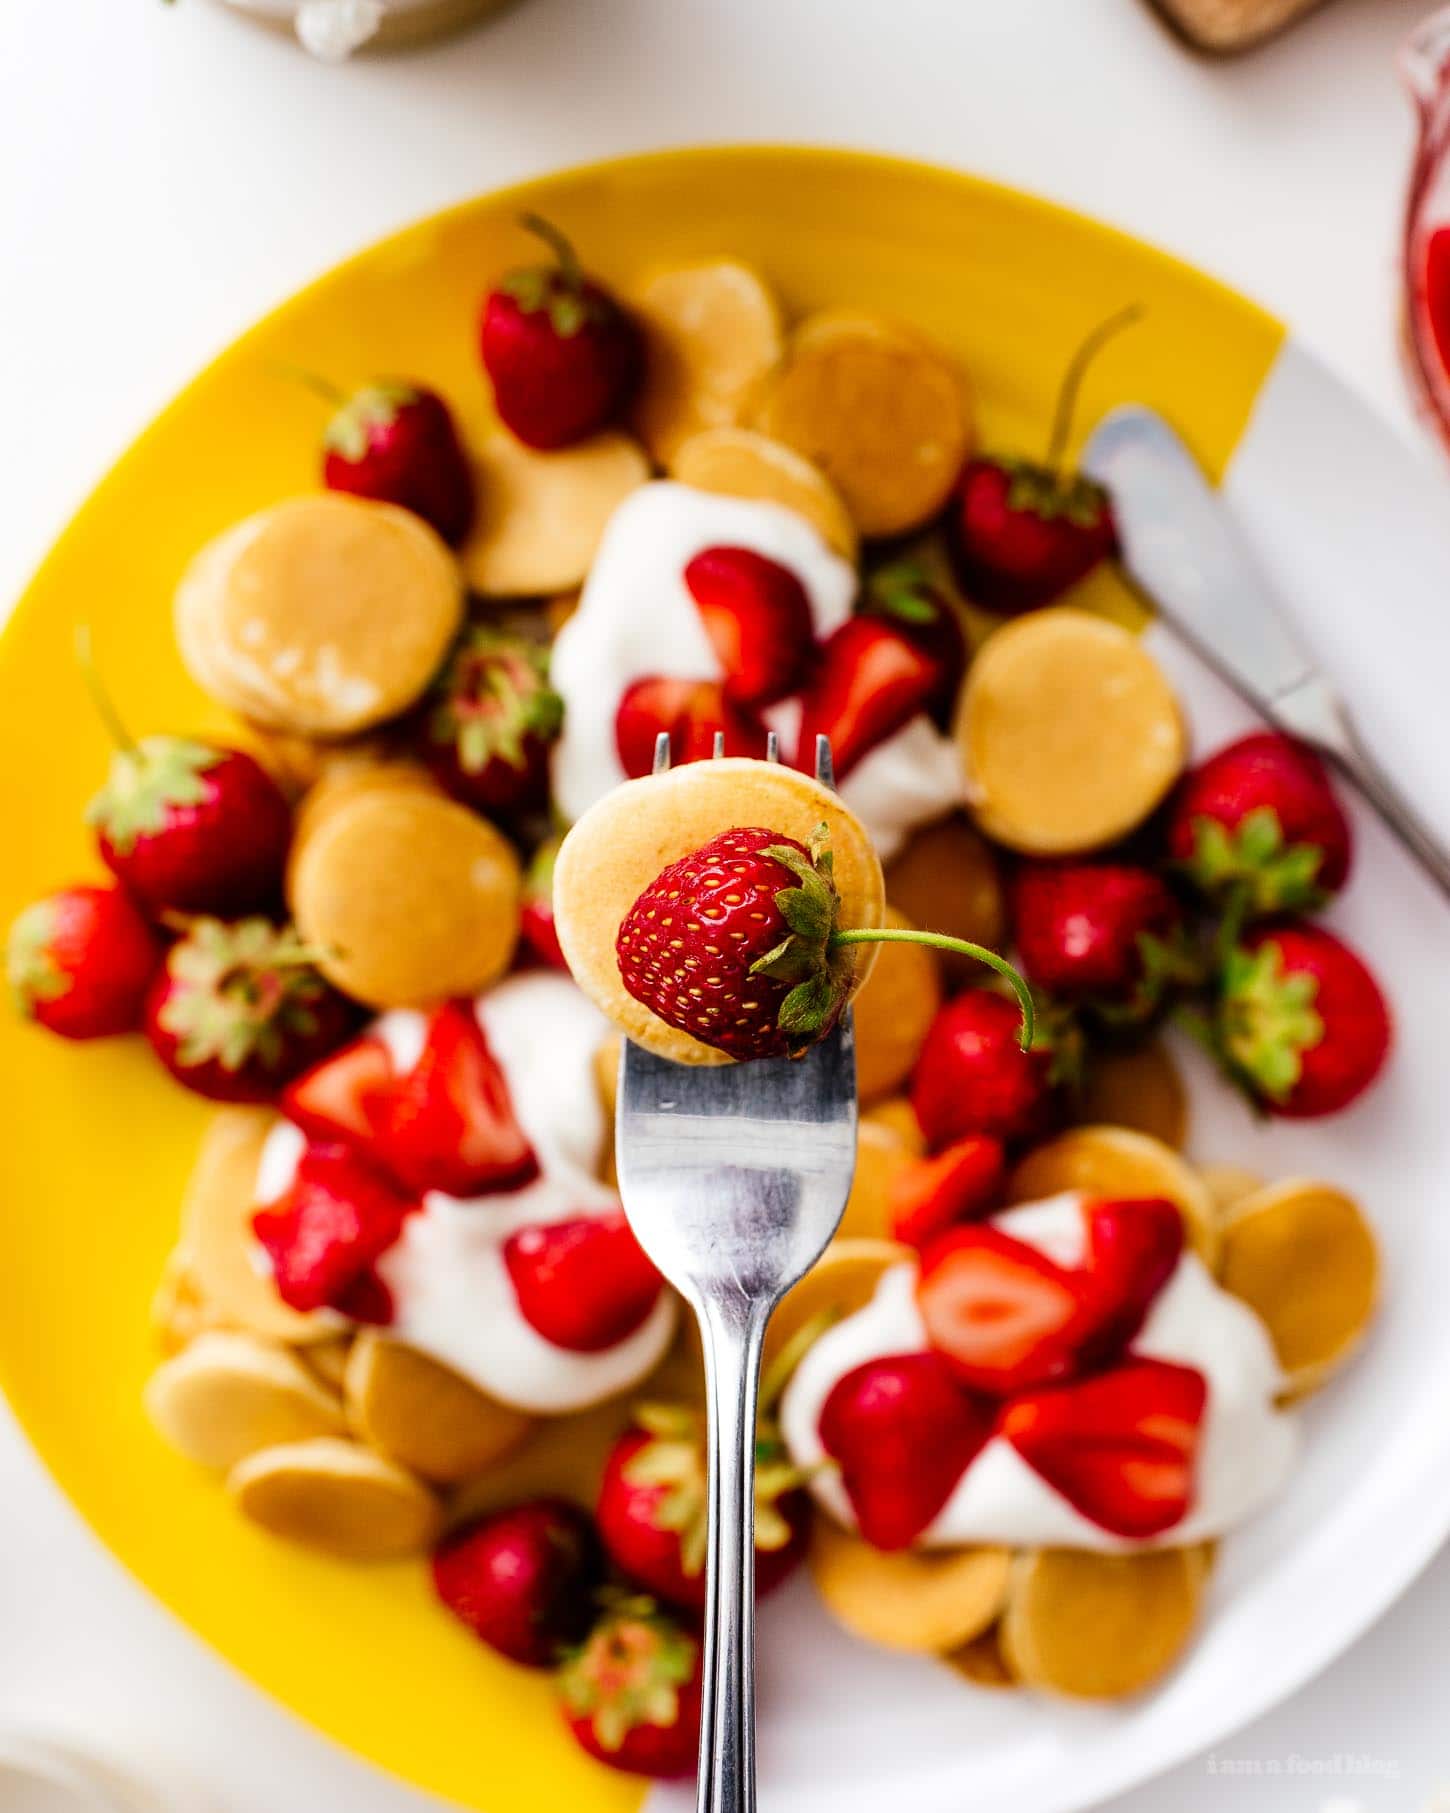 This fluffy strawberry pancake recipe is perfect for summer.  Super cute mini silver dollar vanilla pancakes topped with juicy strawberries and gently whipped cream.  Like a strawberry shortcake for breakfast!  #strawberries #strawberry #strawberry pancakes #strawberry pancakes #strawberry cake #strawberry cakes